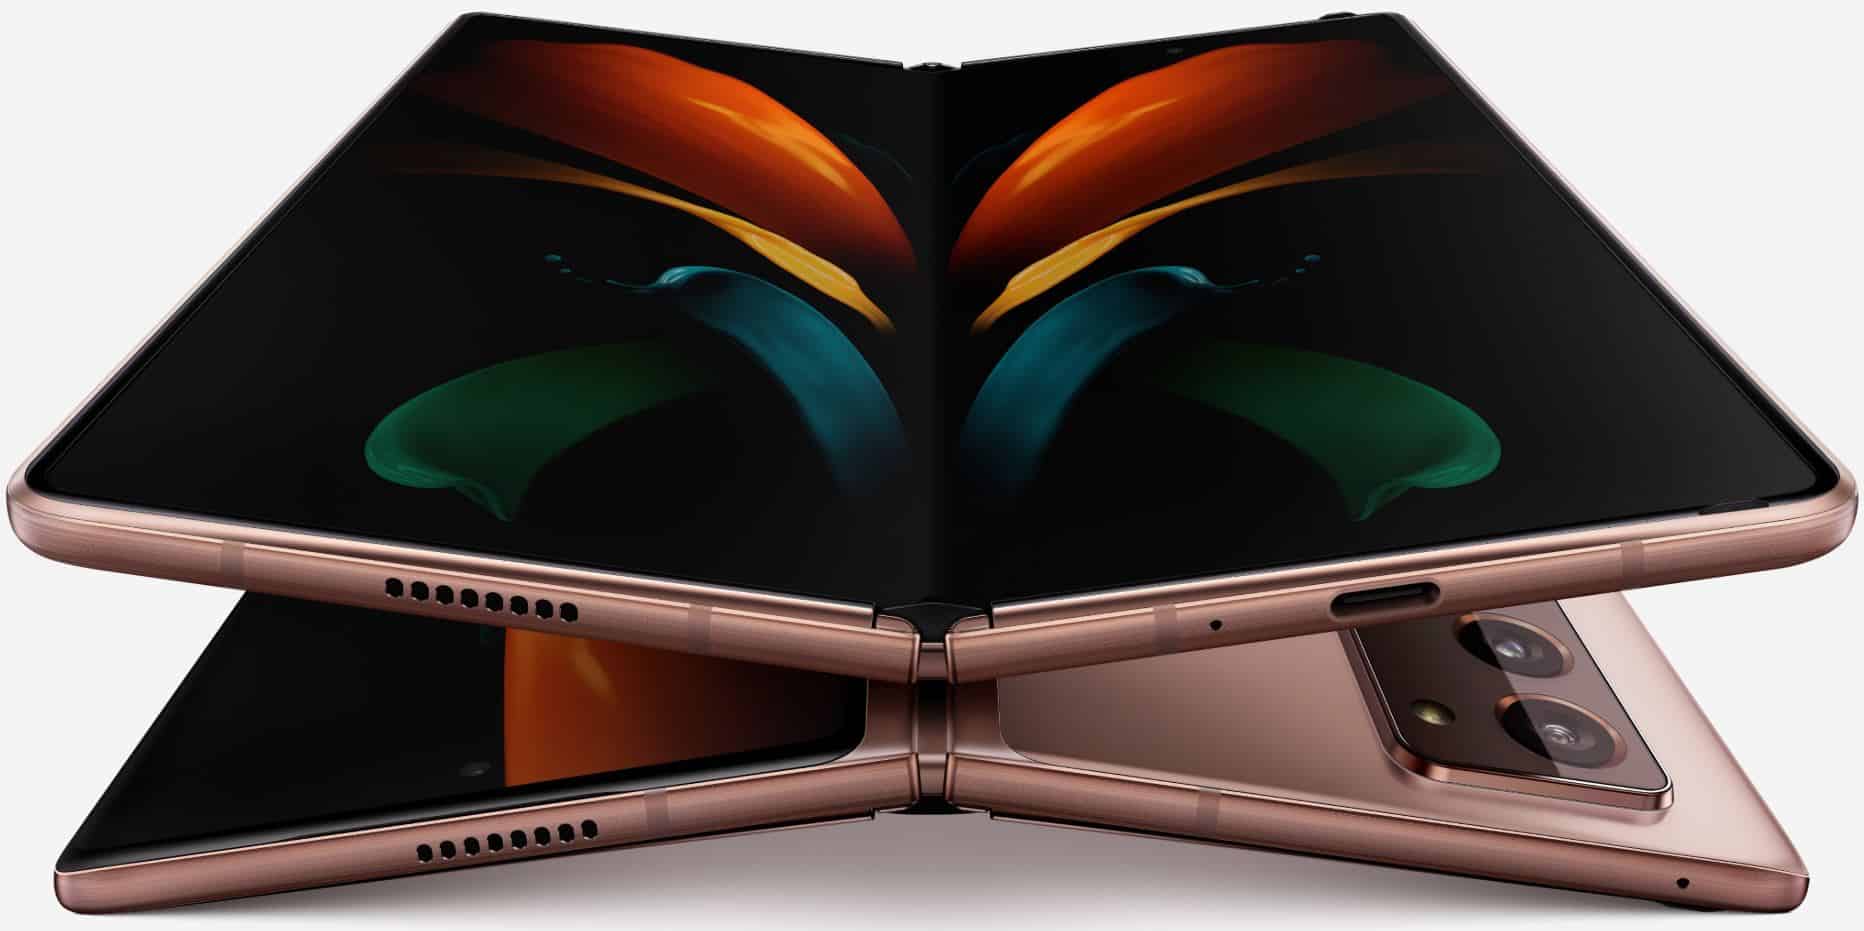 Samsung officially announces Galaxy Z Fold2 foldable smartphone